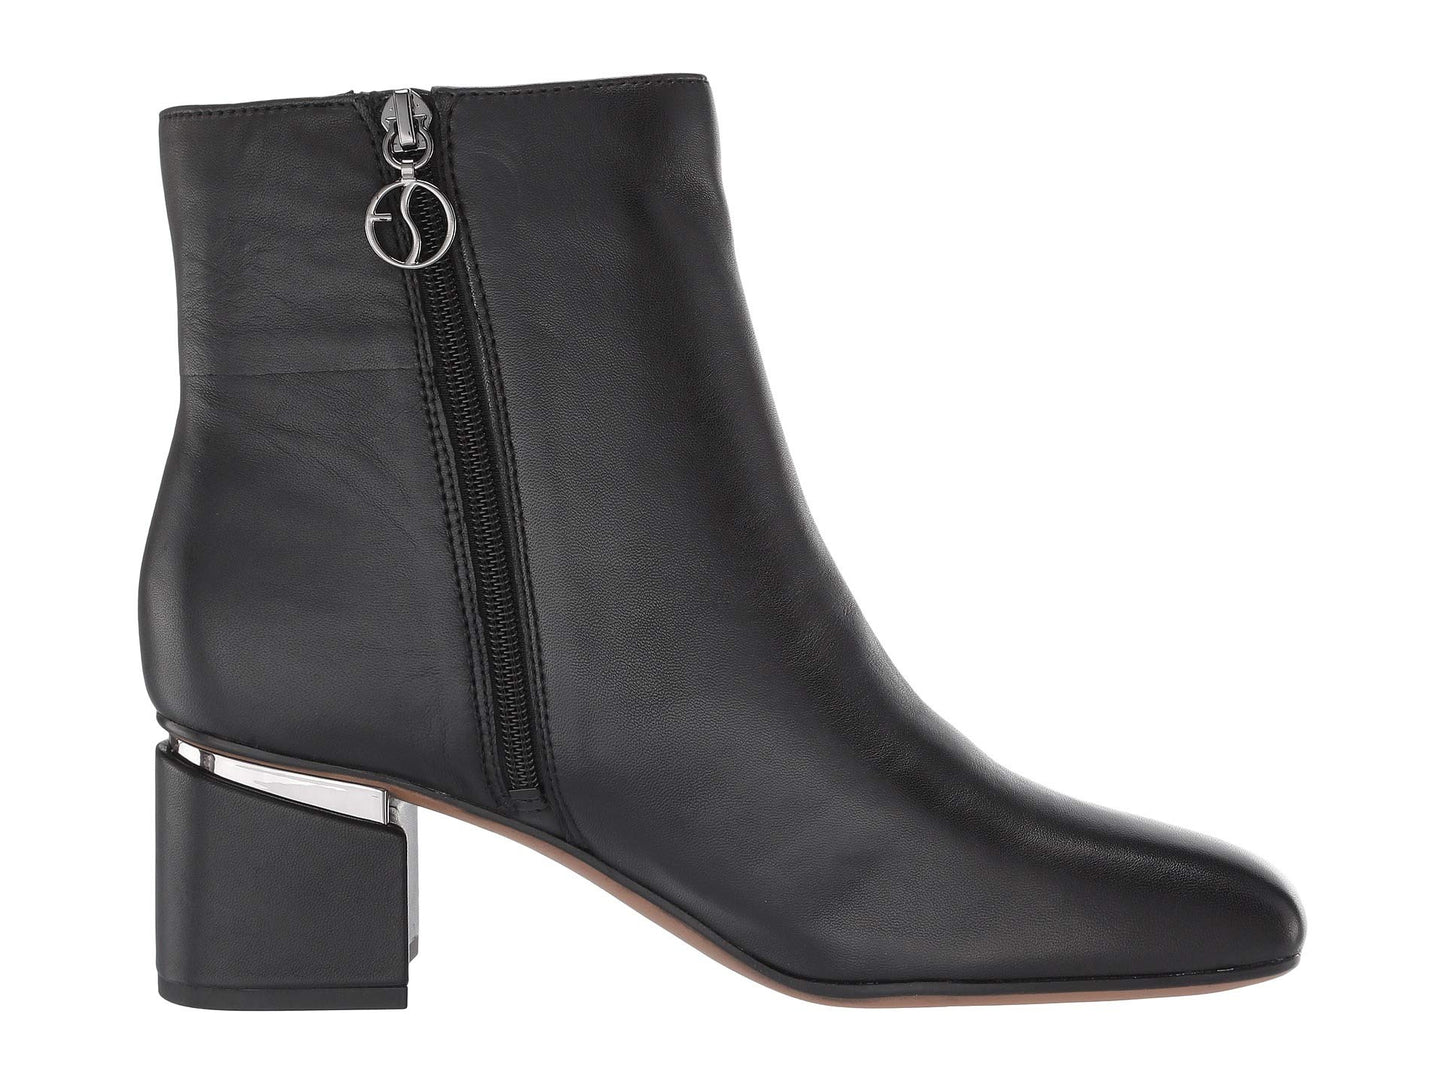 Marquee Black Leather Franco Sarto Ankle Boot